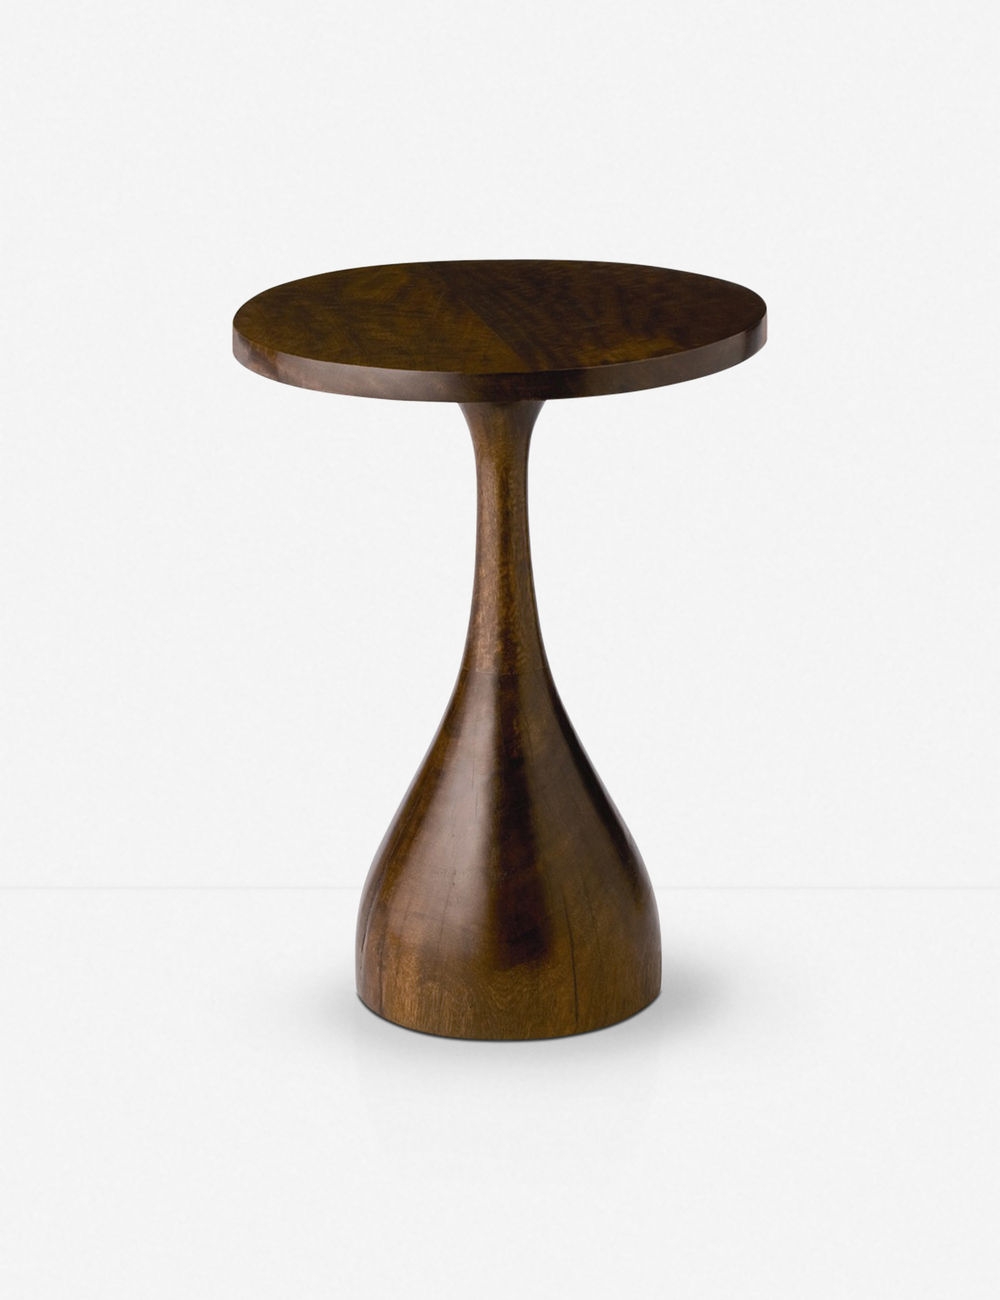 ARTERIORS DARBY ACCENT TABLE - Image 0